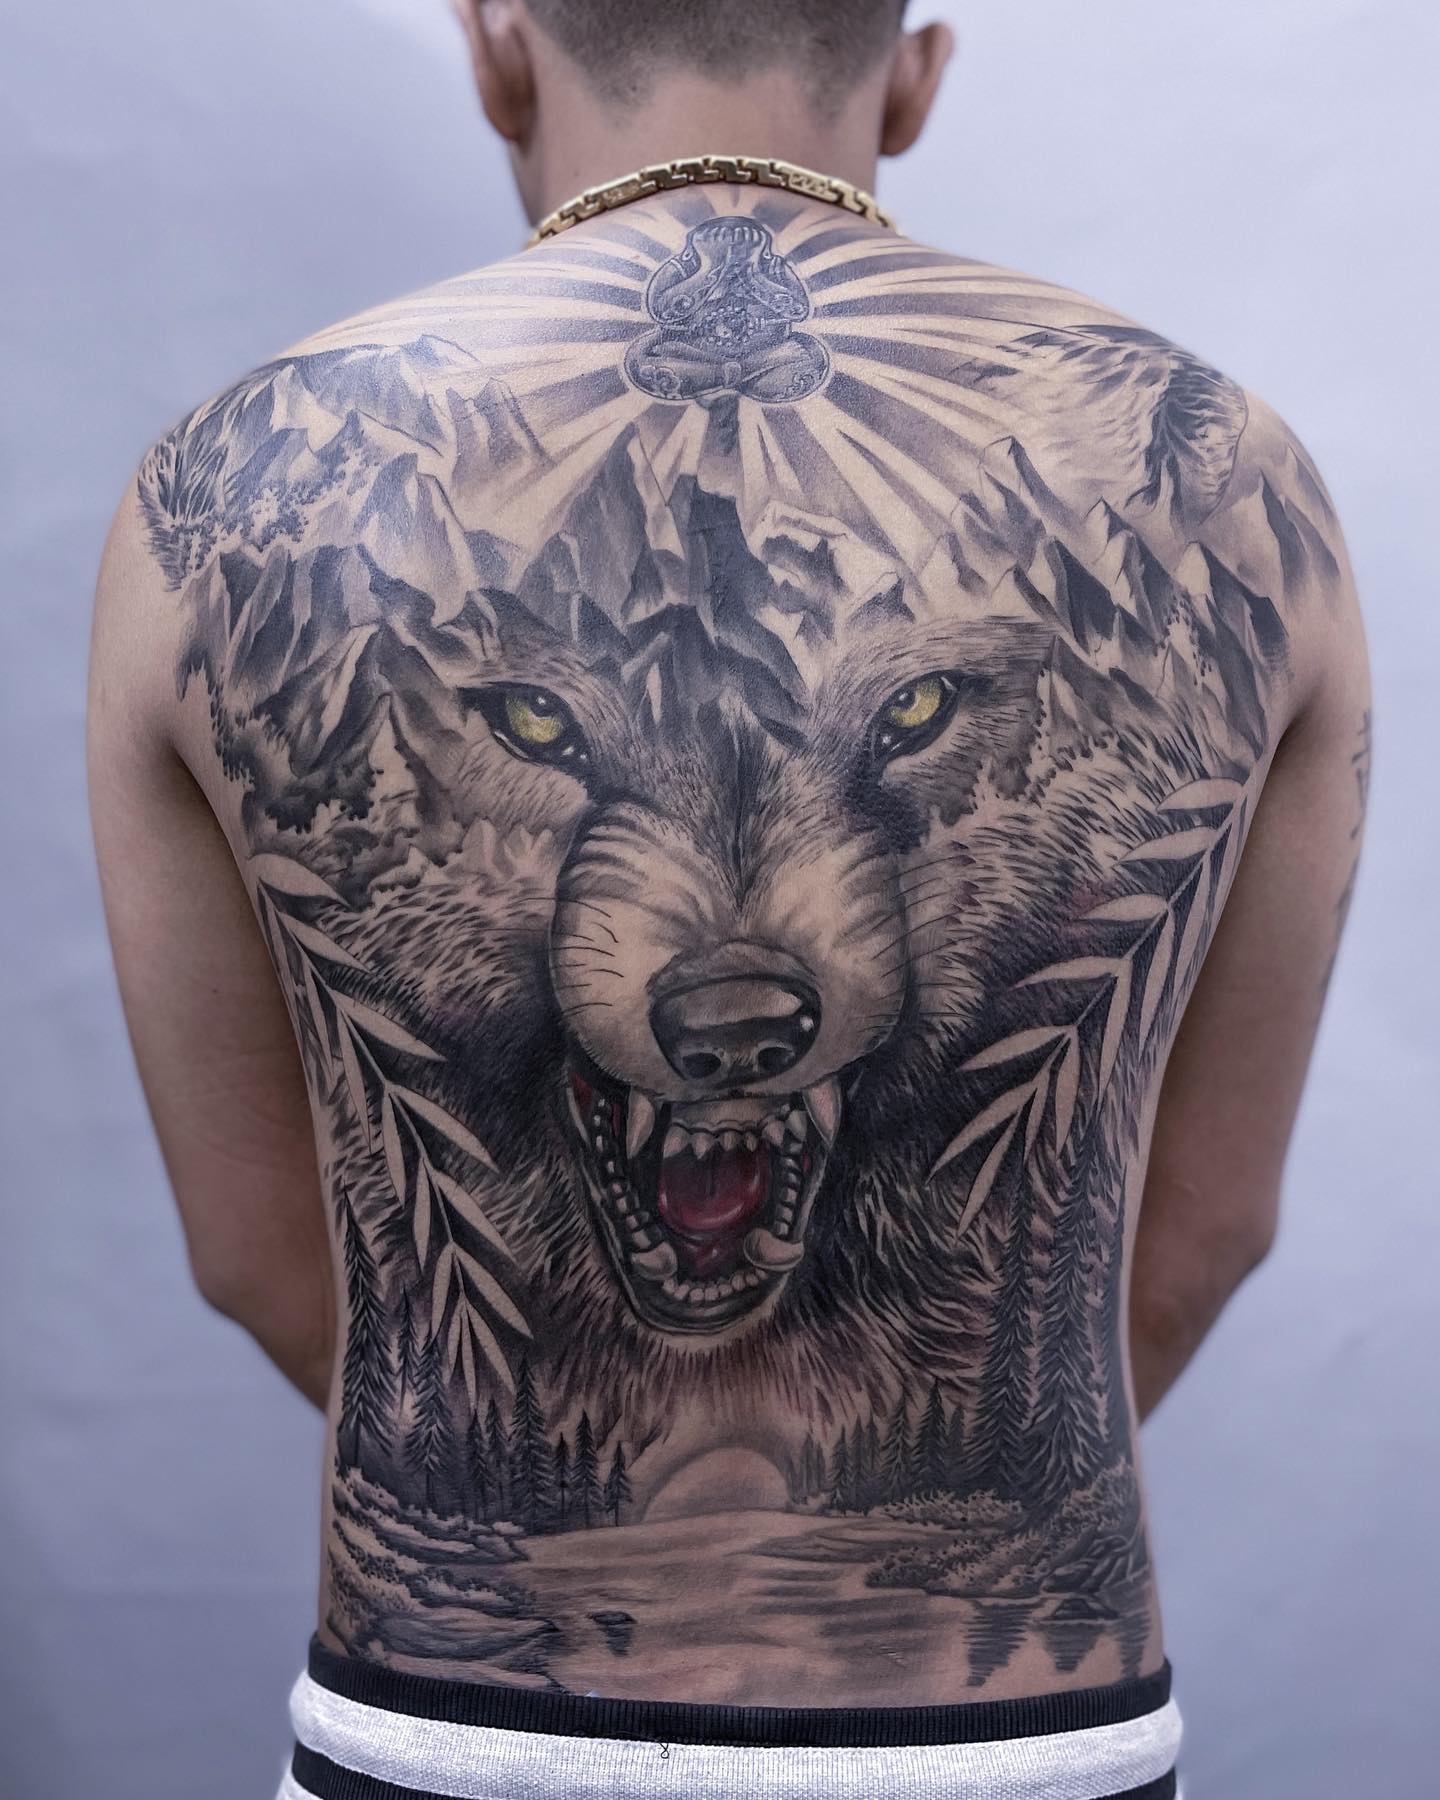 This fantastic design is made by depicting the host of the forest. Undoubtedly, tattooist must know how to harmonize wolf with other stuff.